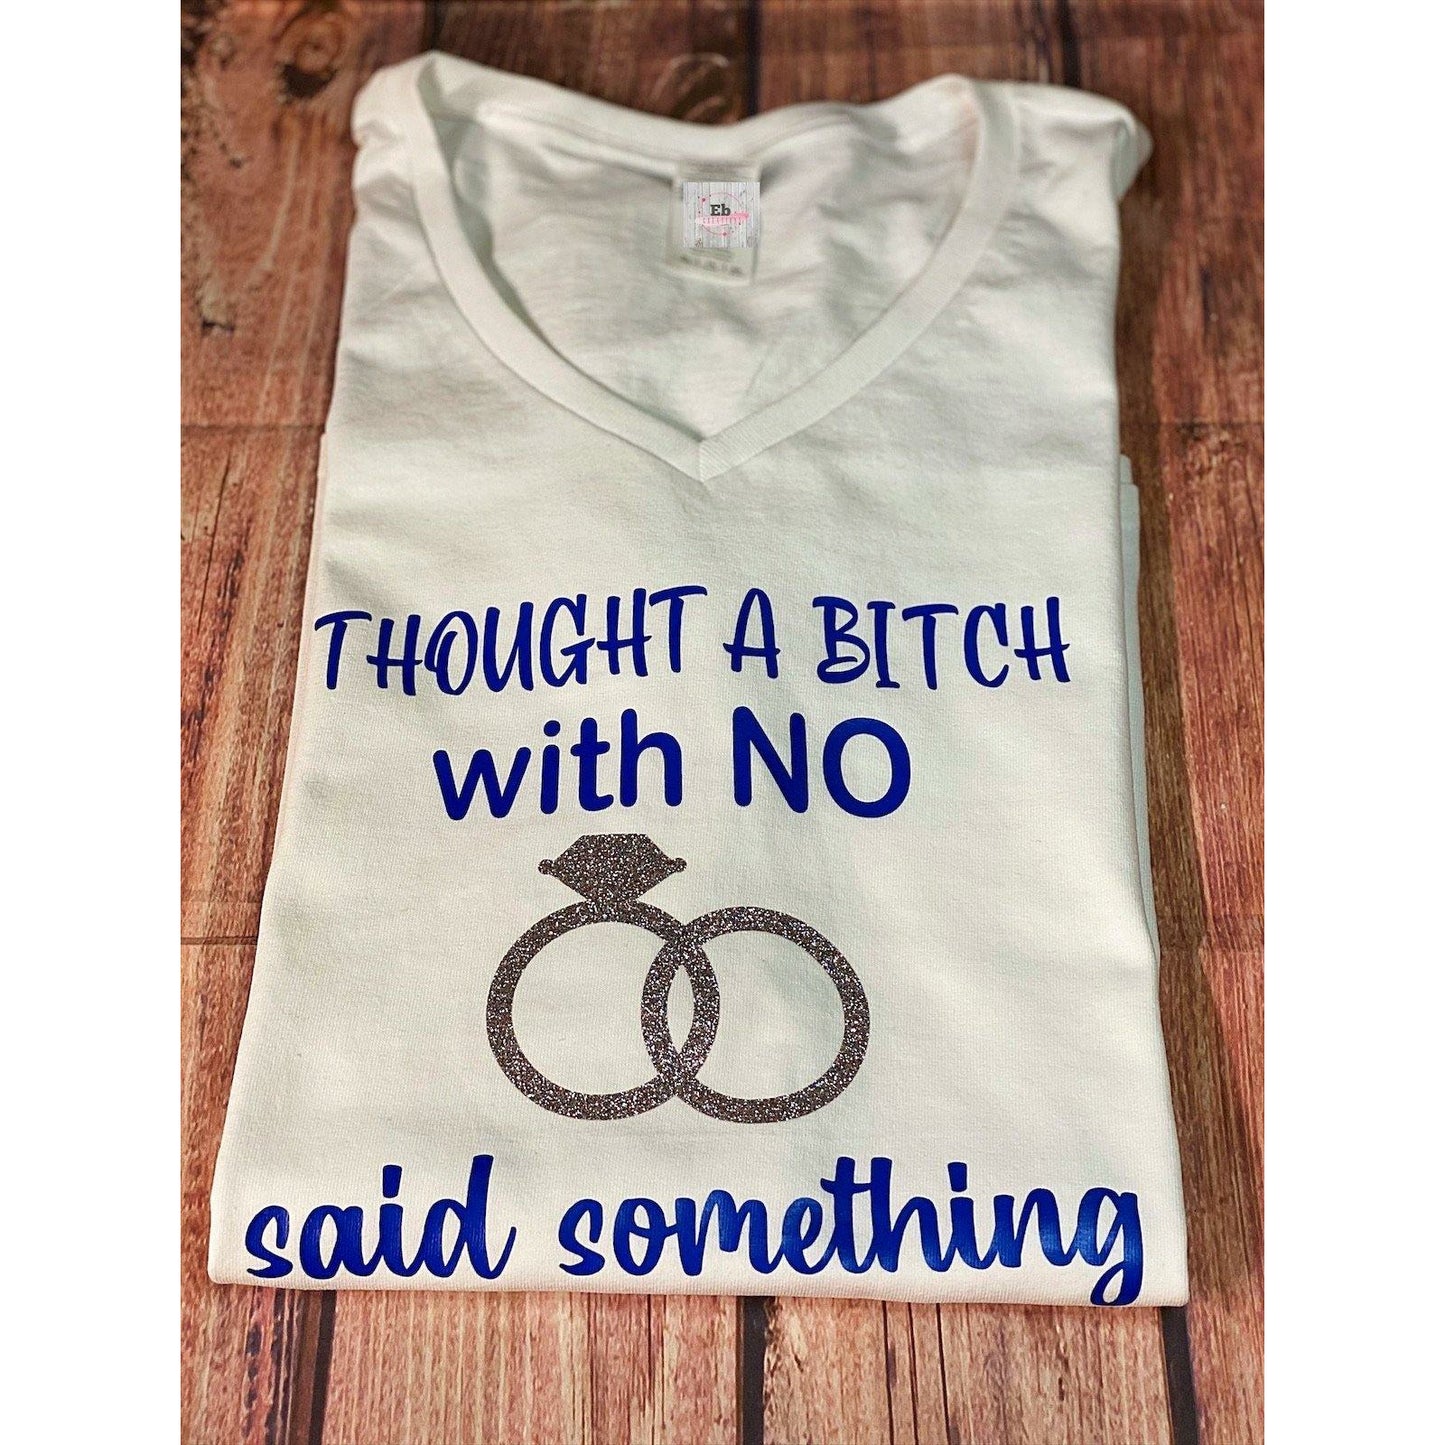 Thought A bitch with NO ring said something - Eb Creations Thought A bitch with NO ring said something